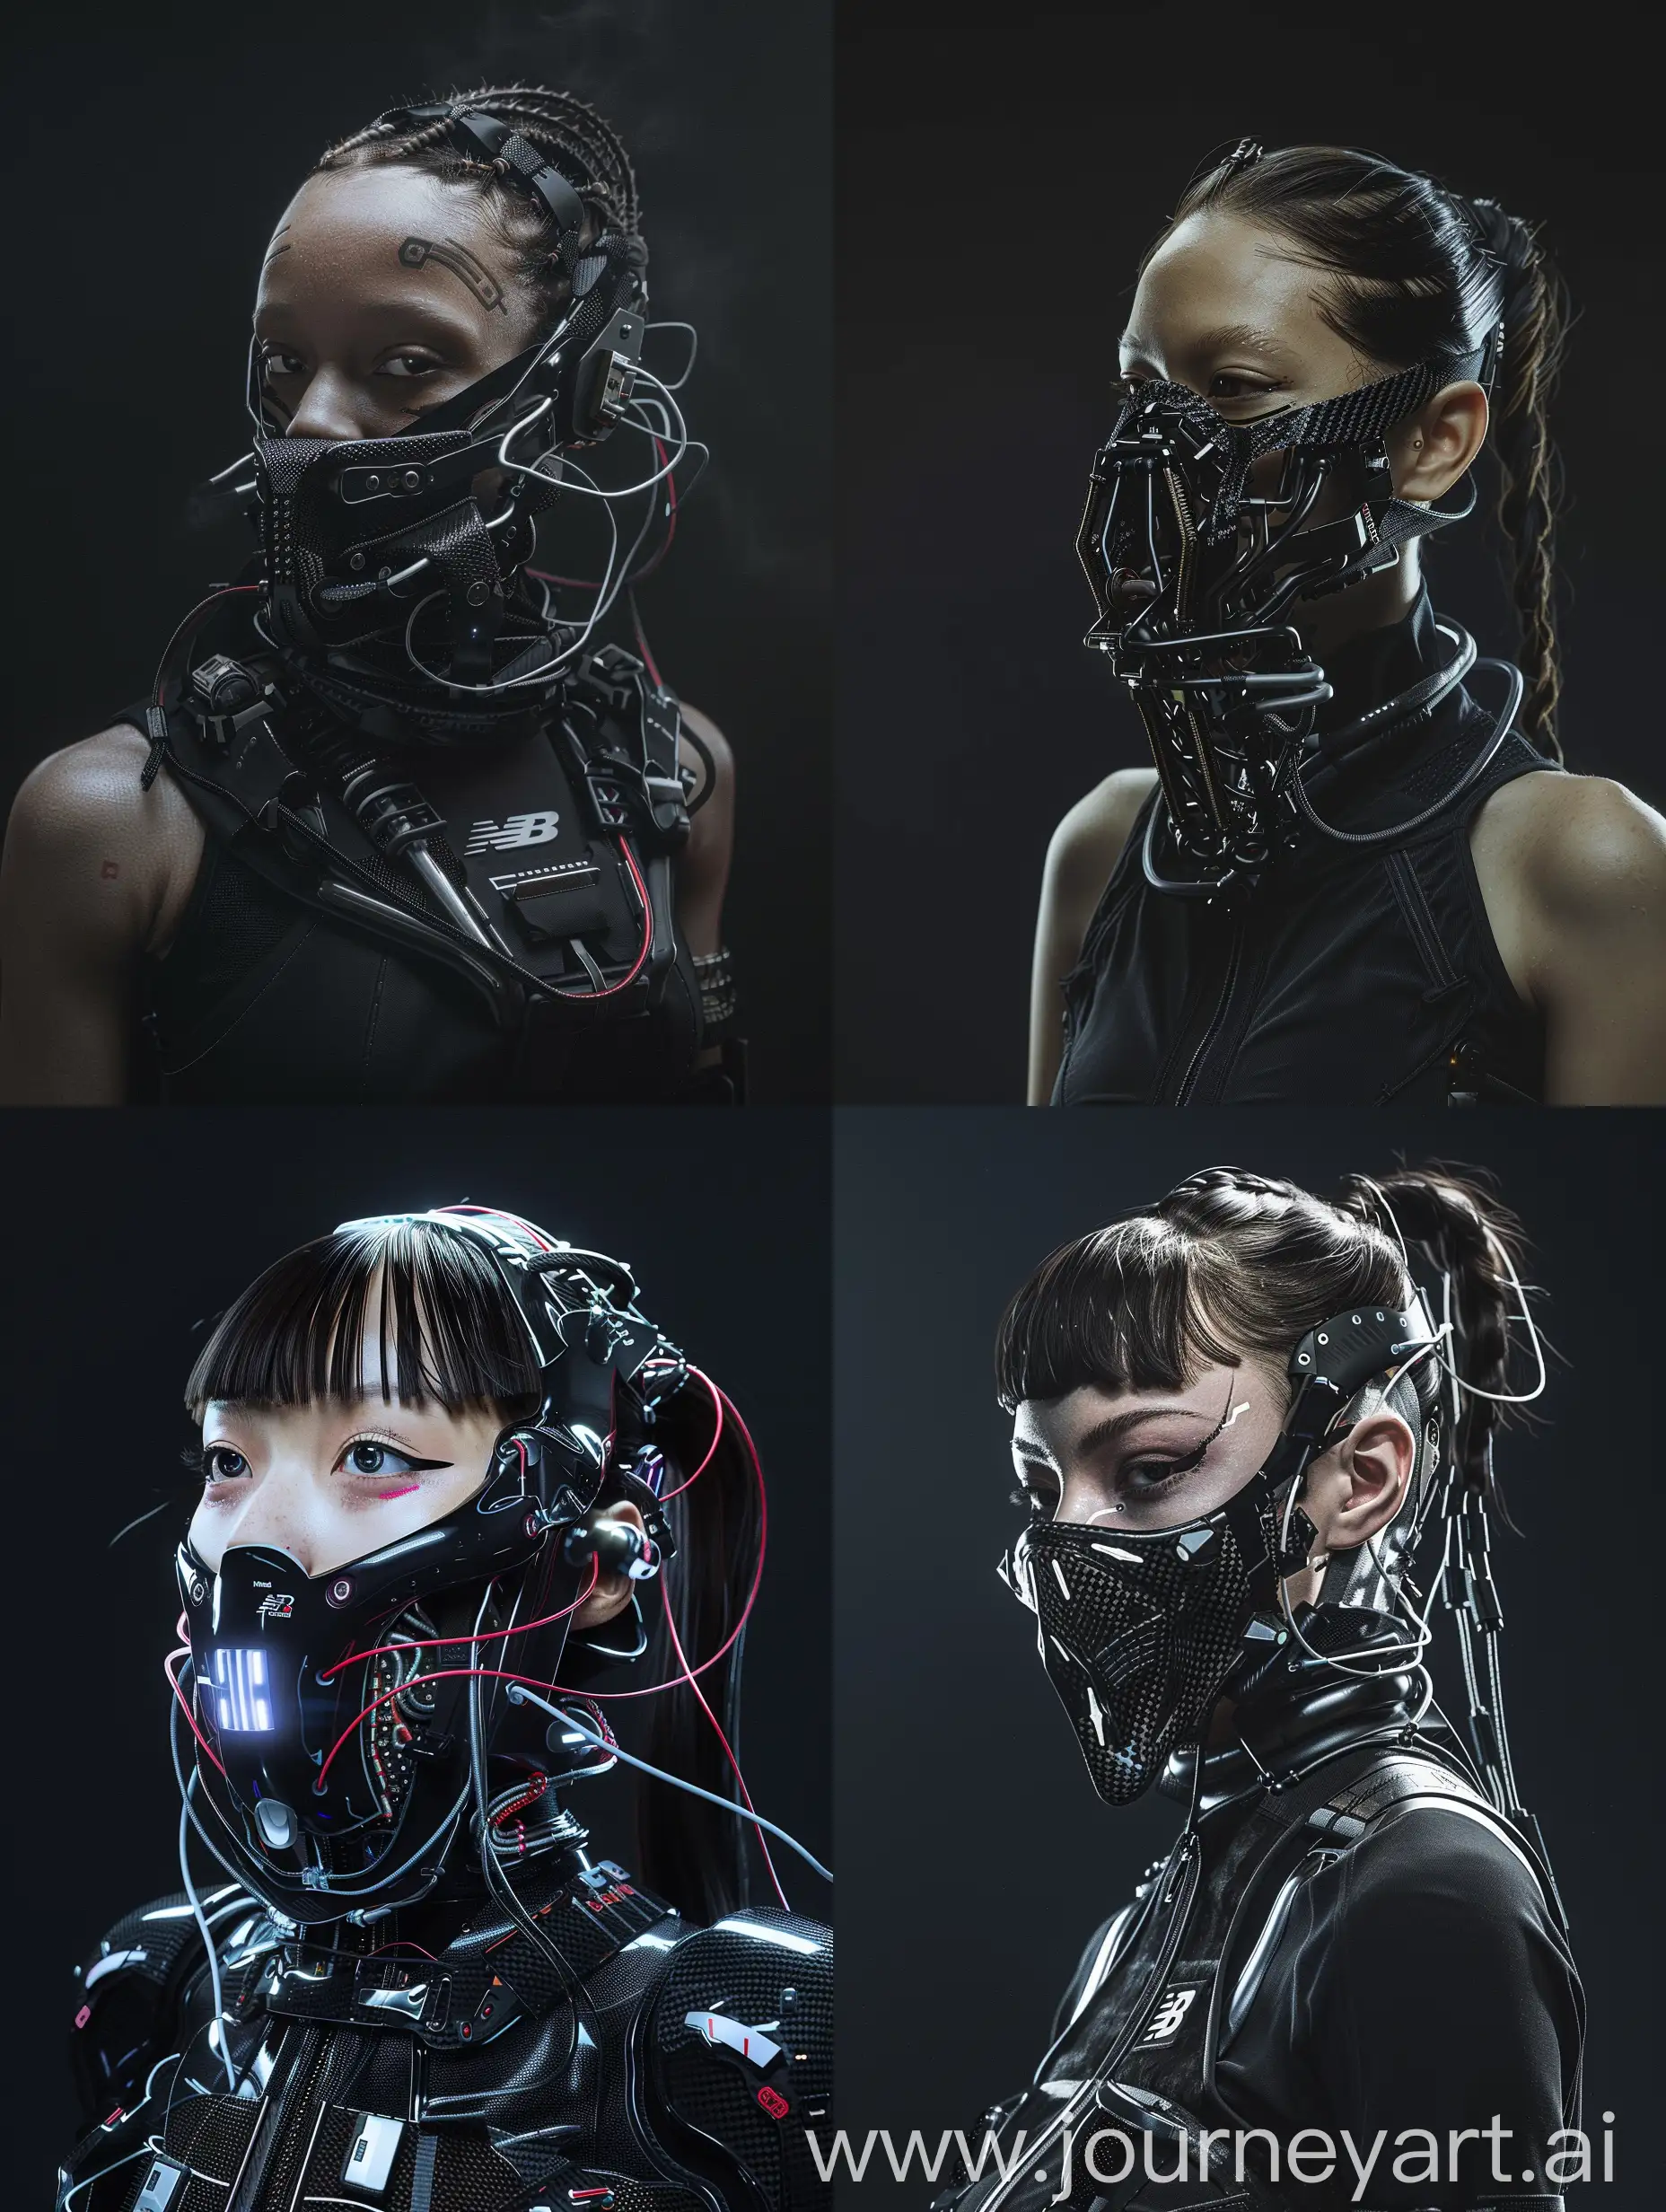 Futuristic-Cyberpunk-Character-with-Carbon-Fiber-Mask